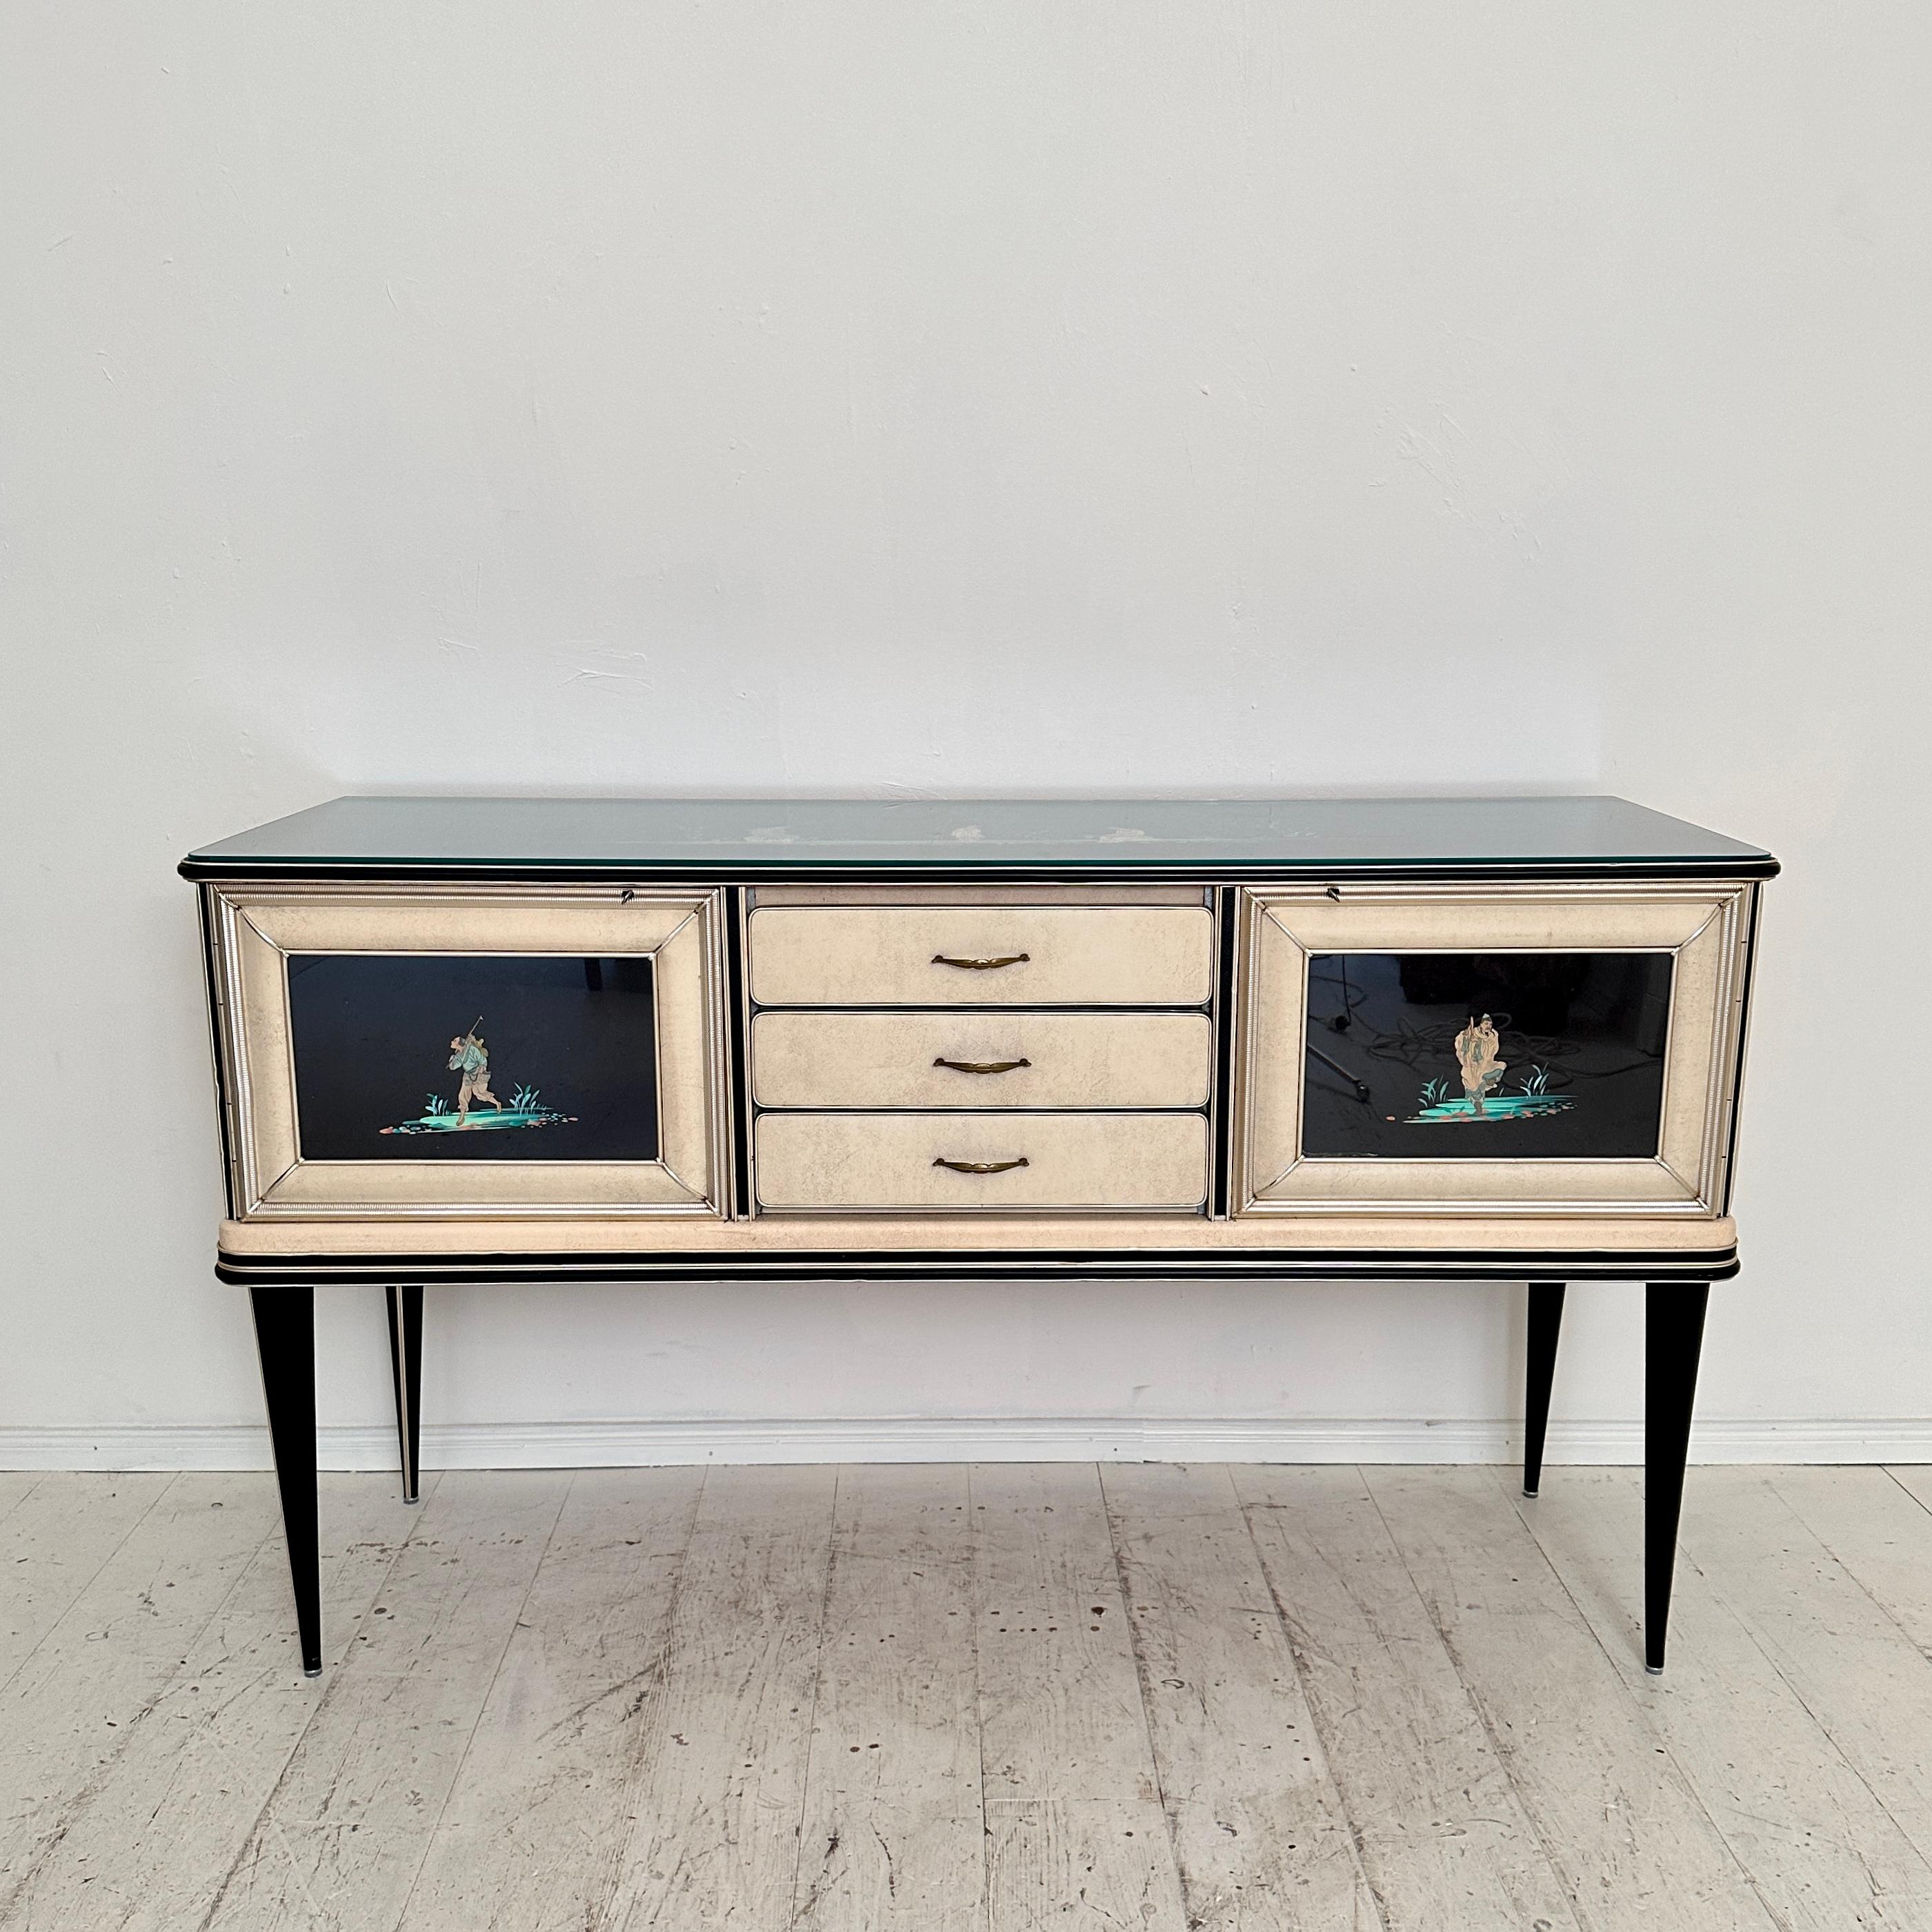 Mid-Century Chinoserie Sideboard by Umberto Mascagni for Harrods London, 1953 For Sale 3